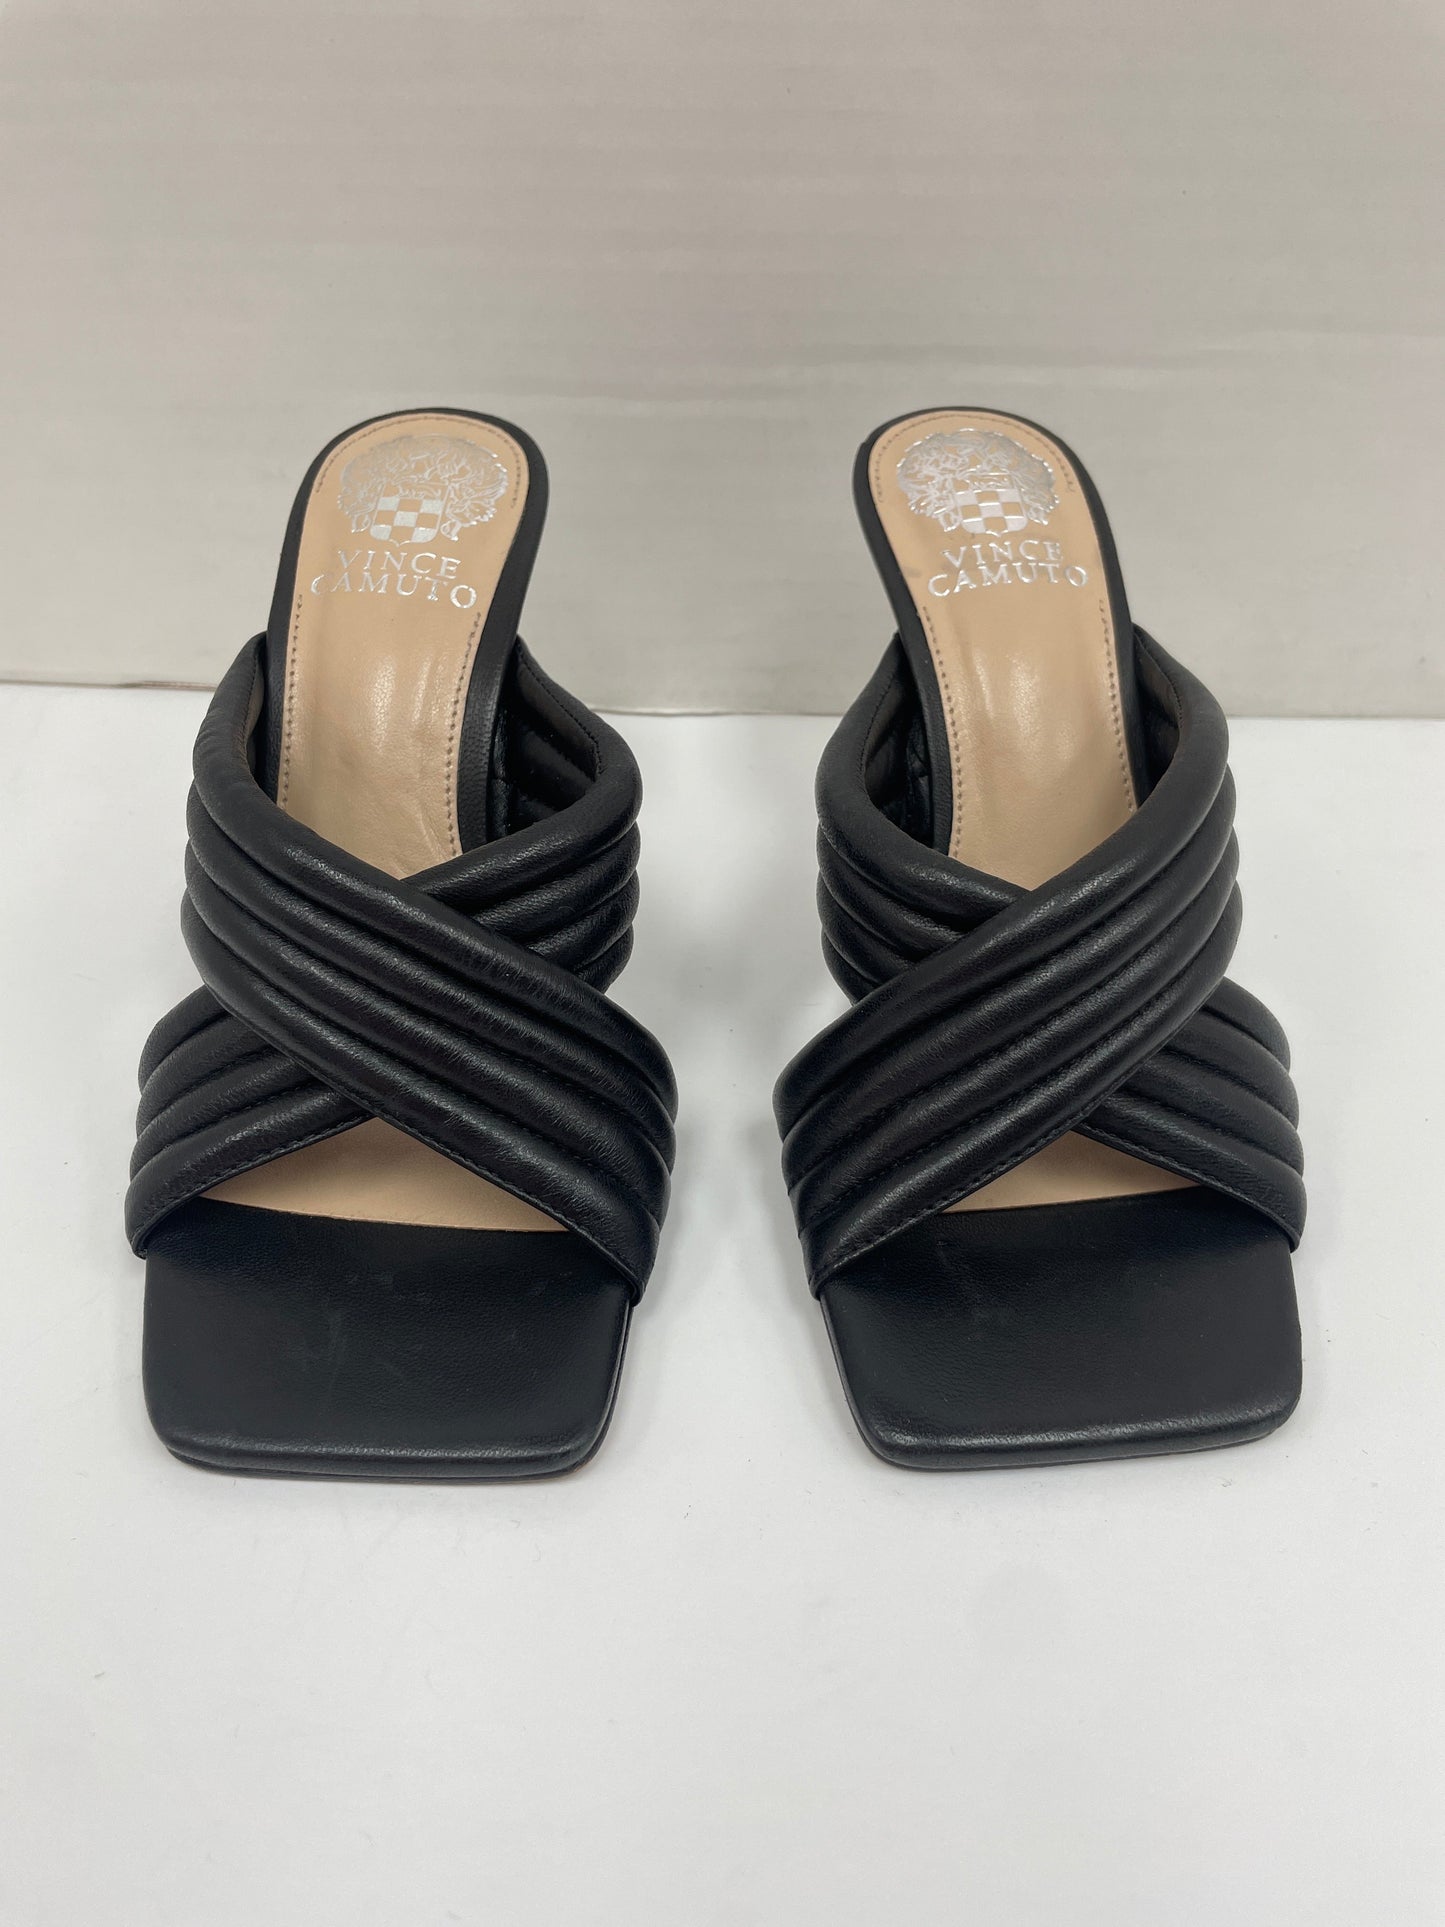 Shoes Heels Kitten By Vince Camuto  Size: 6.5